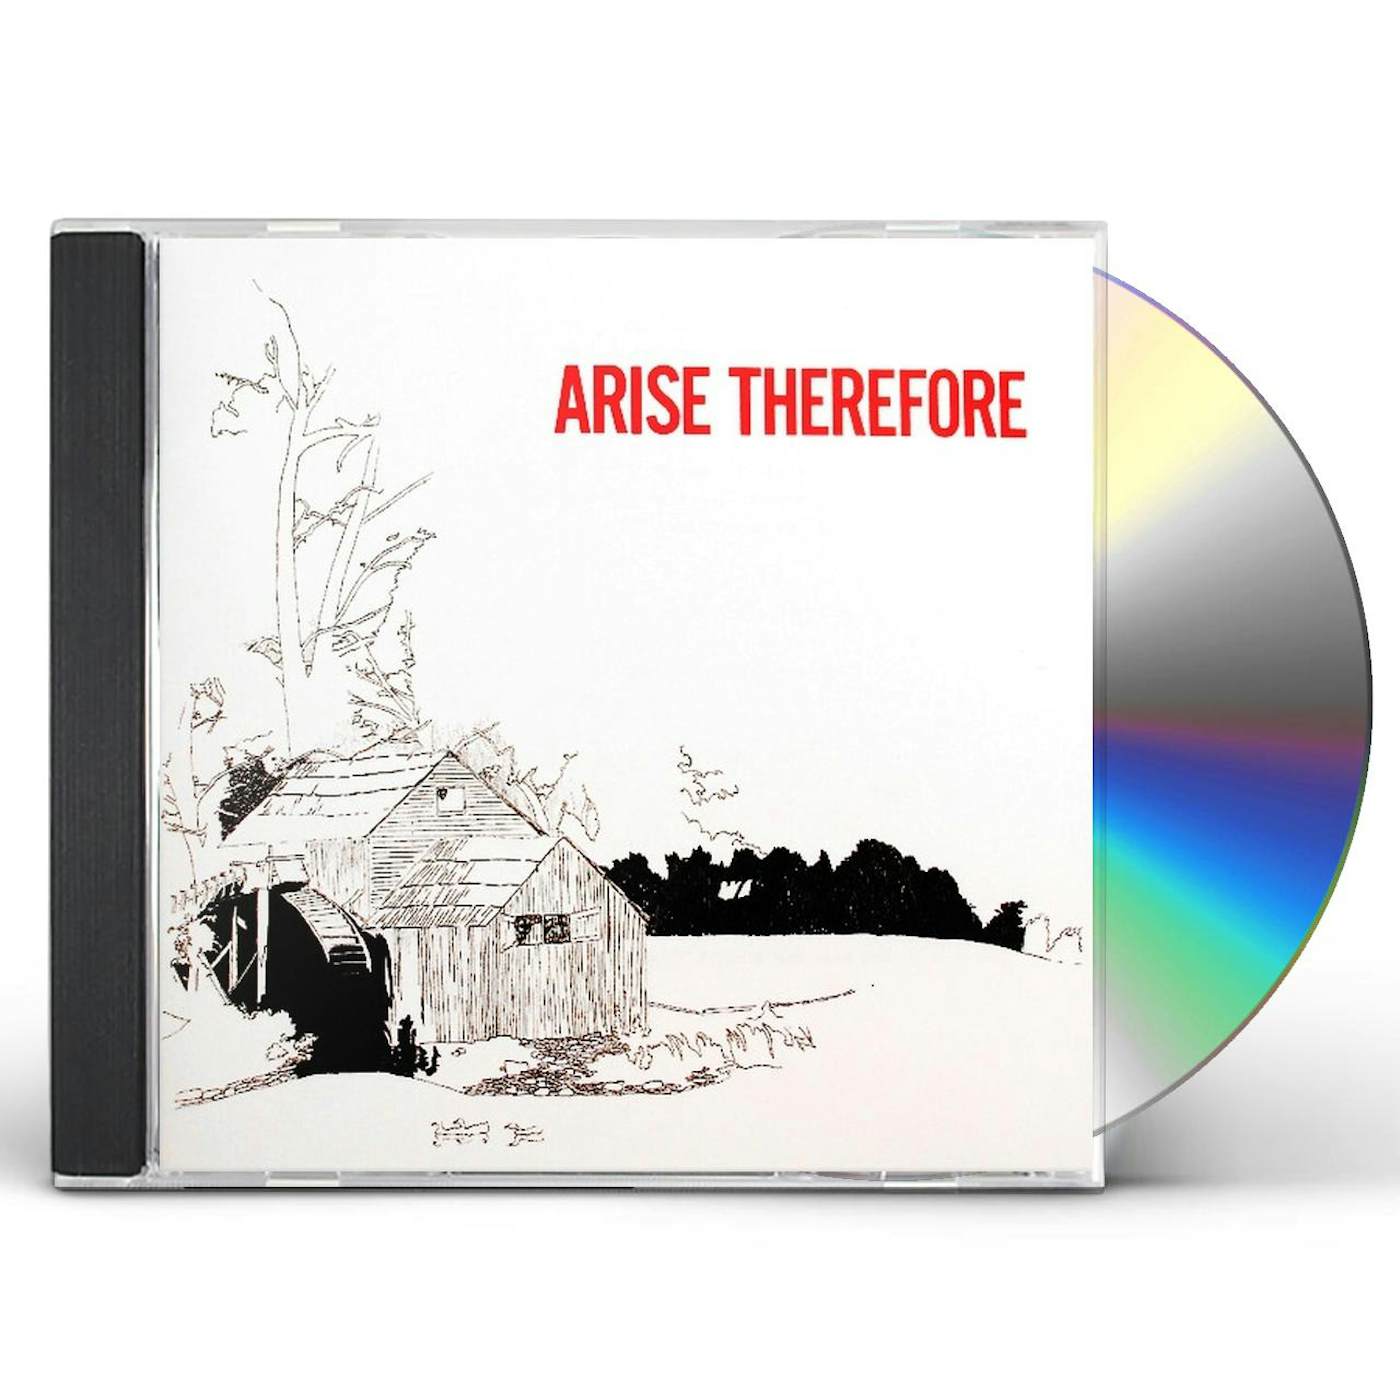 Palace Music ARISE THEREFORE CD